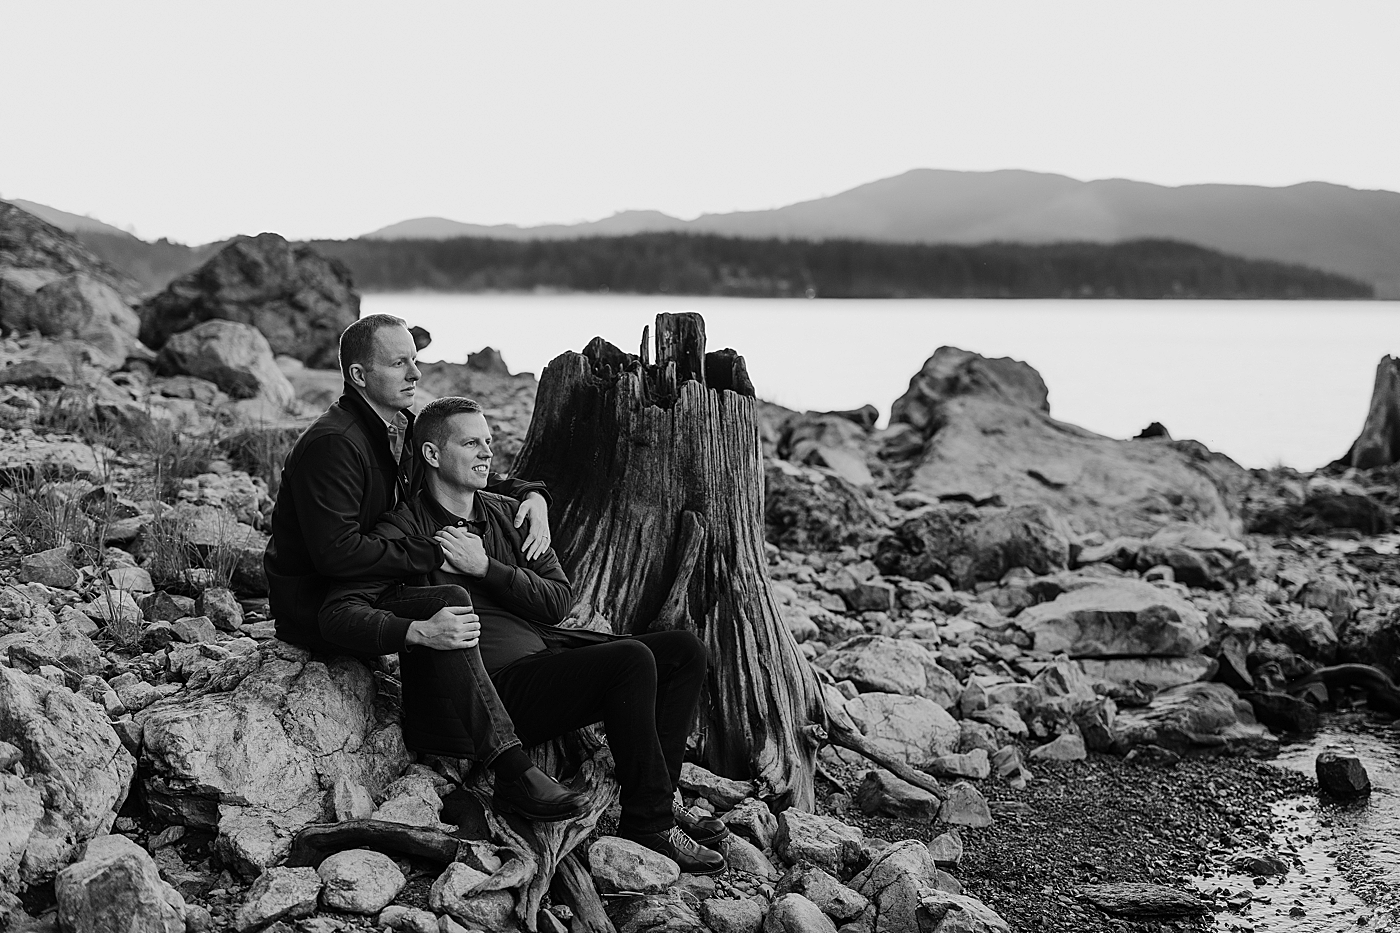 Couple sitting on rocks, looking out over the water. Photo by Megan Montalvo Photography.